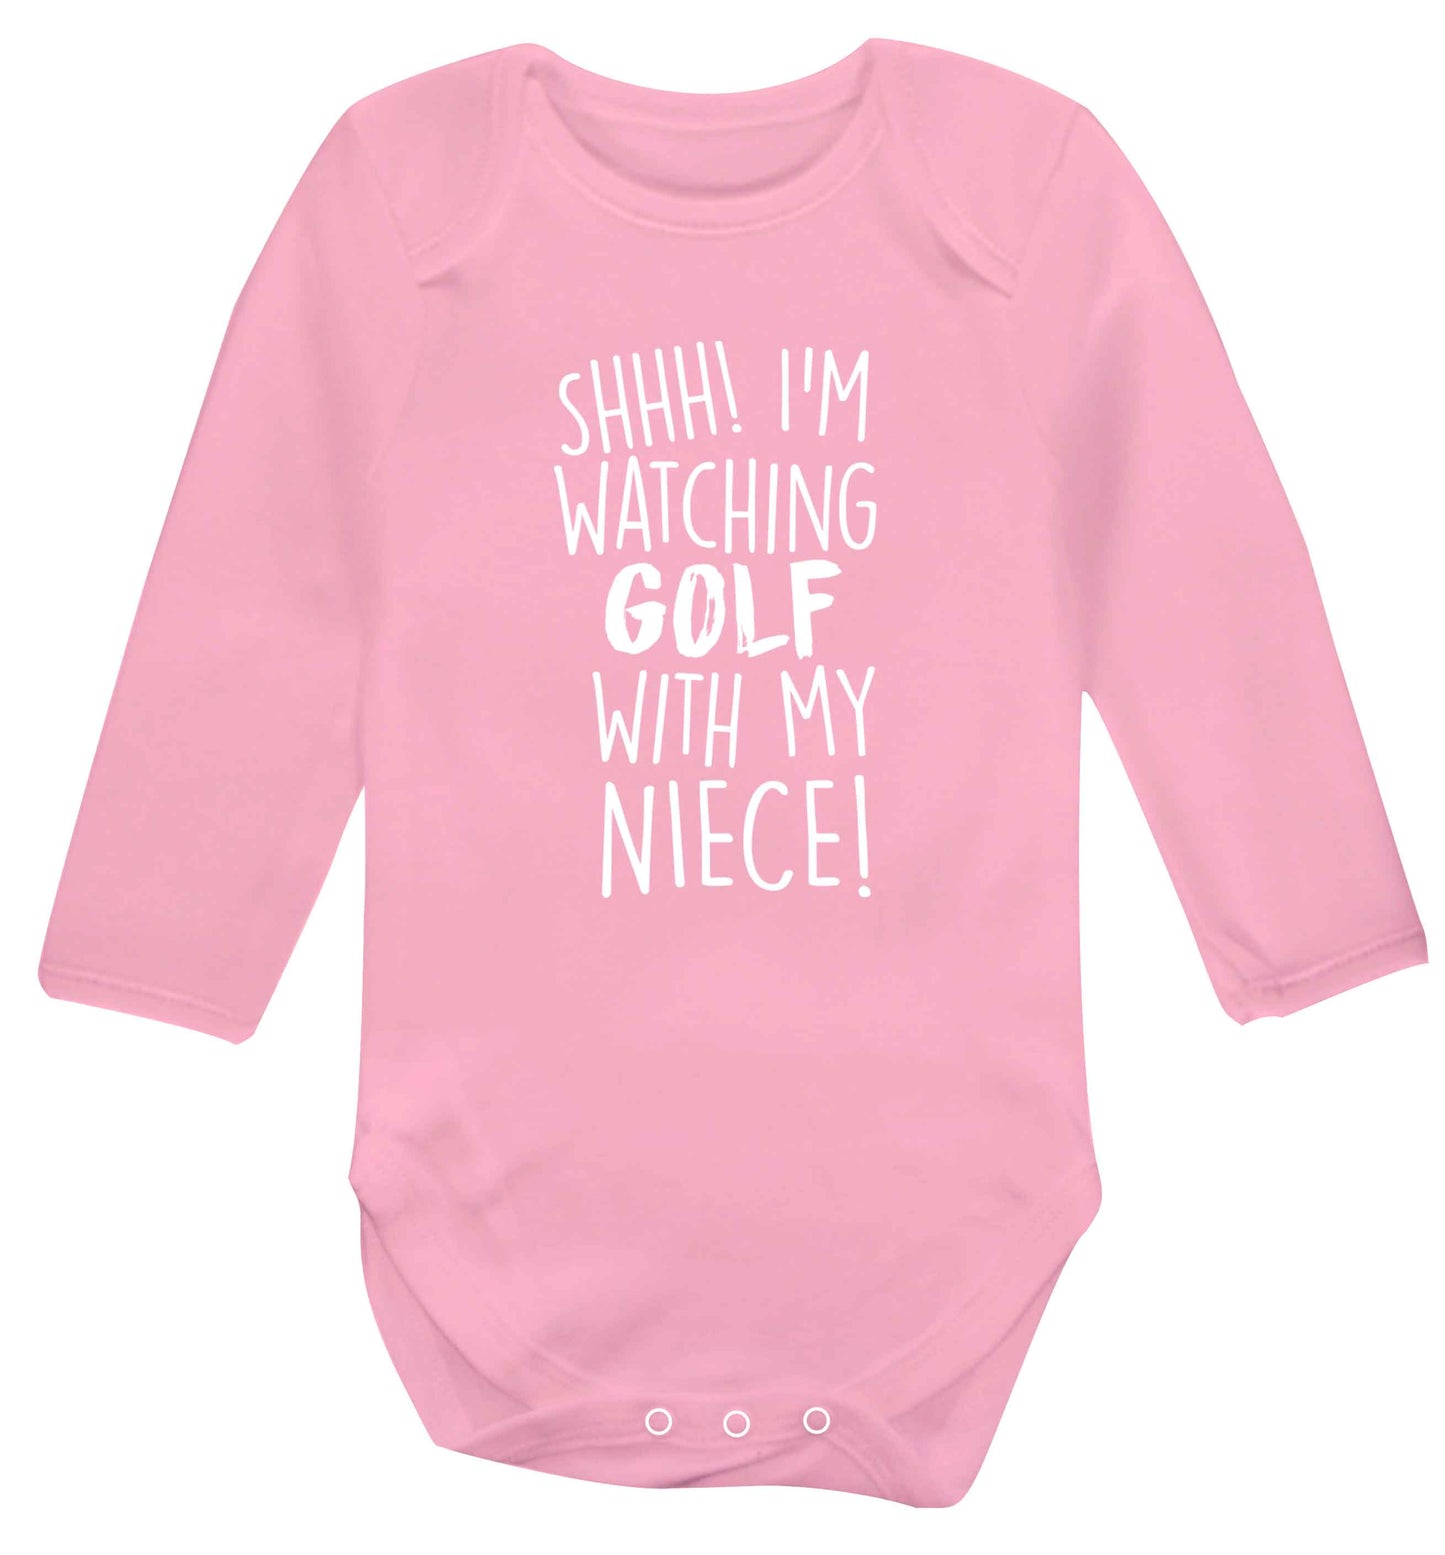 Shh I'm watching golf with my niece Baby Vest long sleeved pale pink 6-12 months